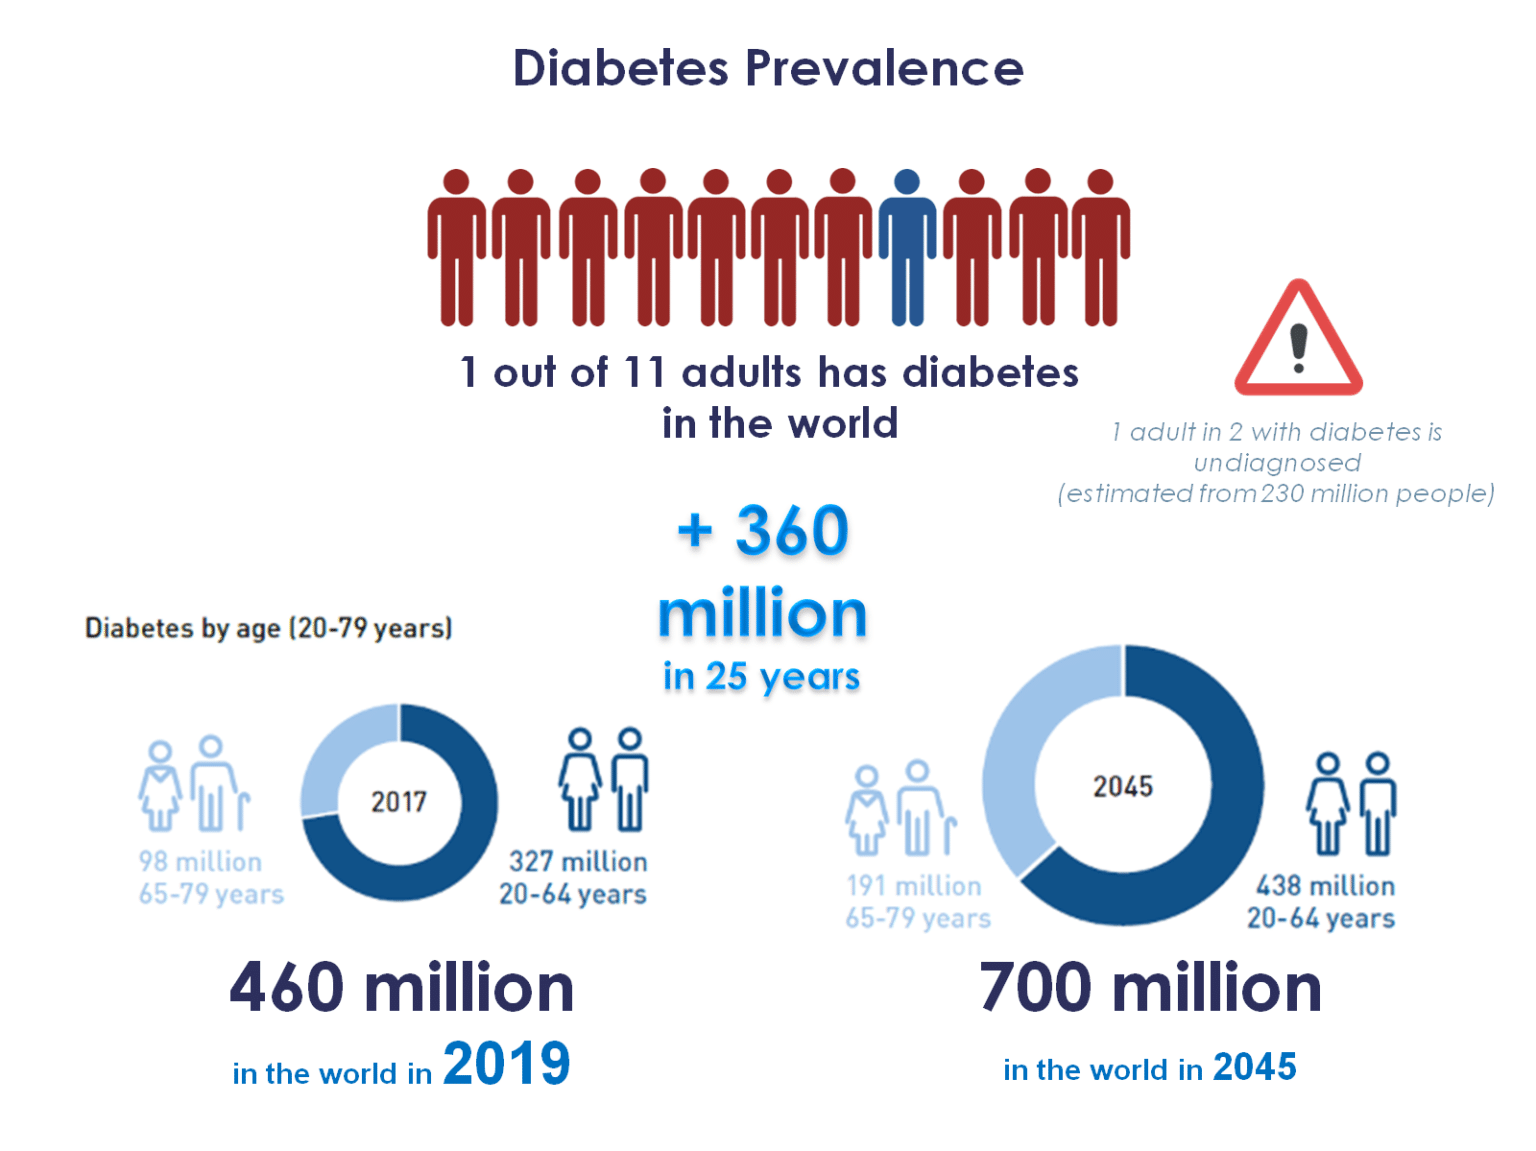 Who Is Affected By Diabetes What Are The Health Risks Pep2dia®